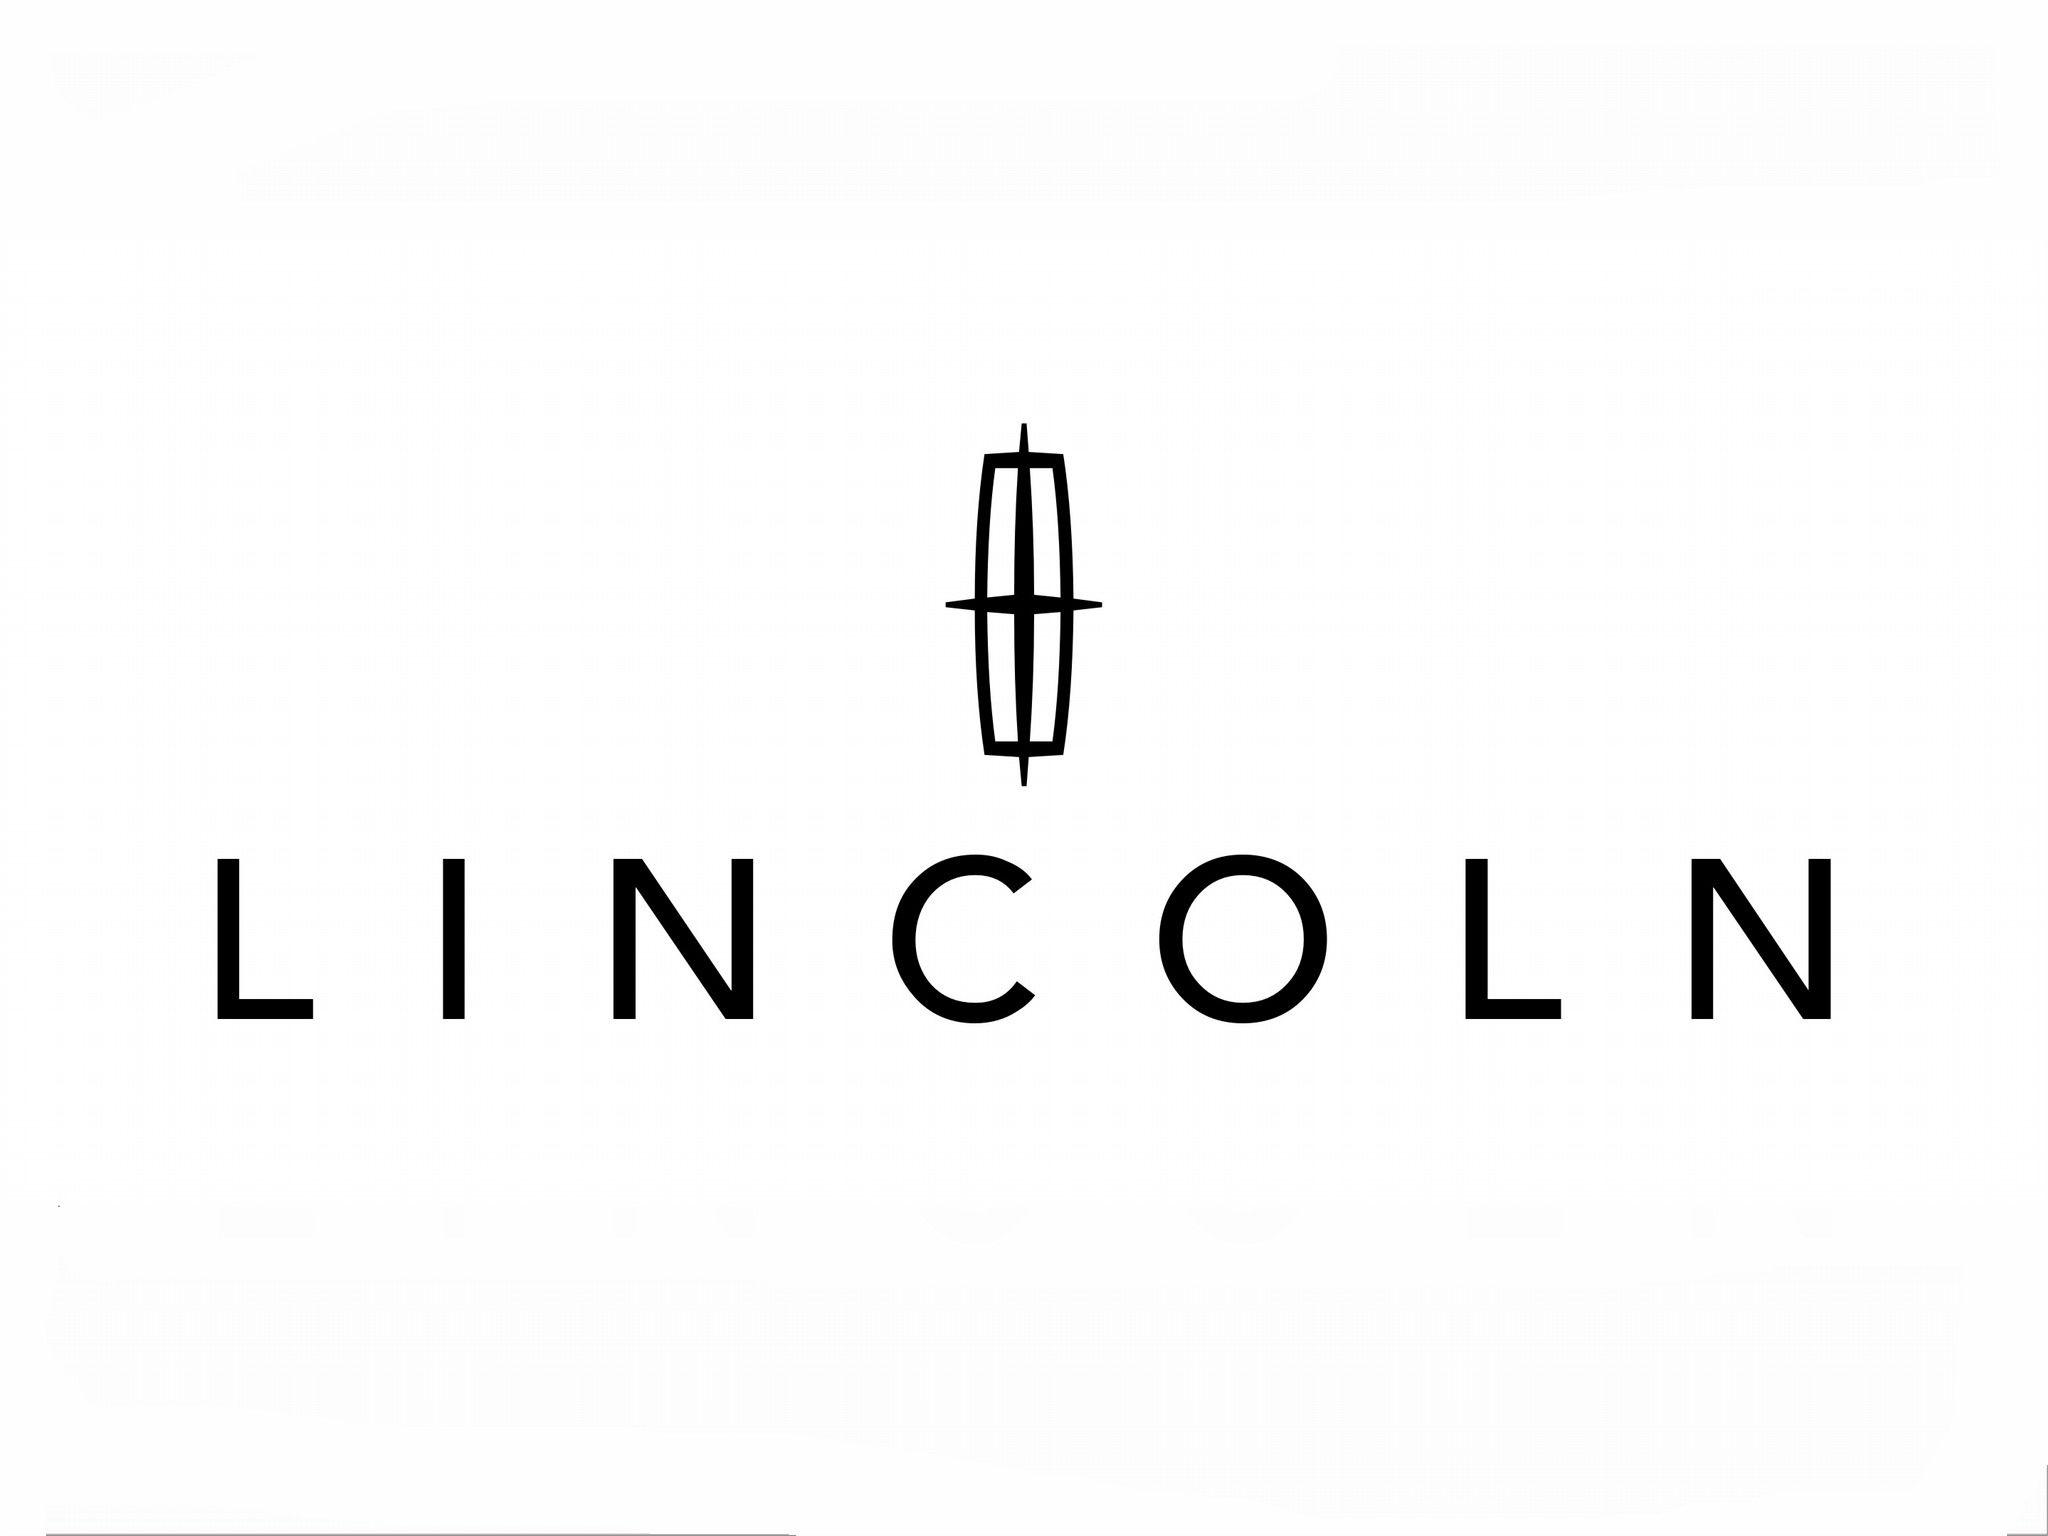 Old Lincoln Logo - Lincoln Logo, Lincoln Car Symbol Meaning and History. Car Brand